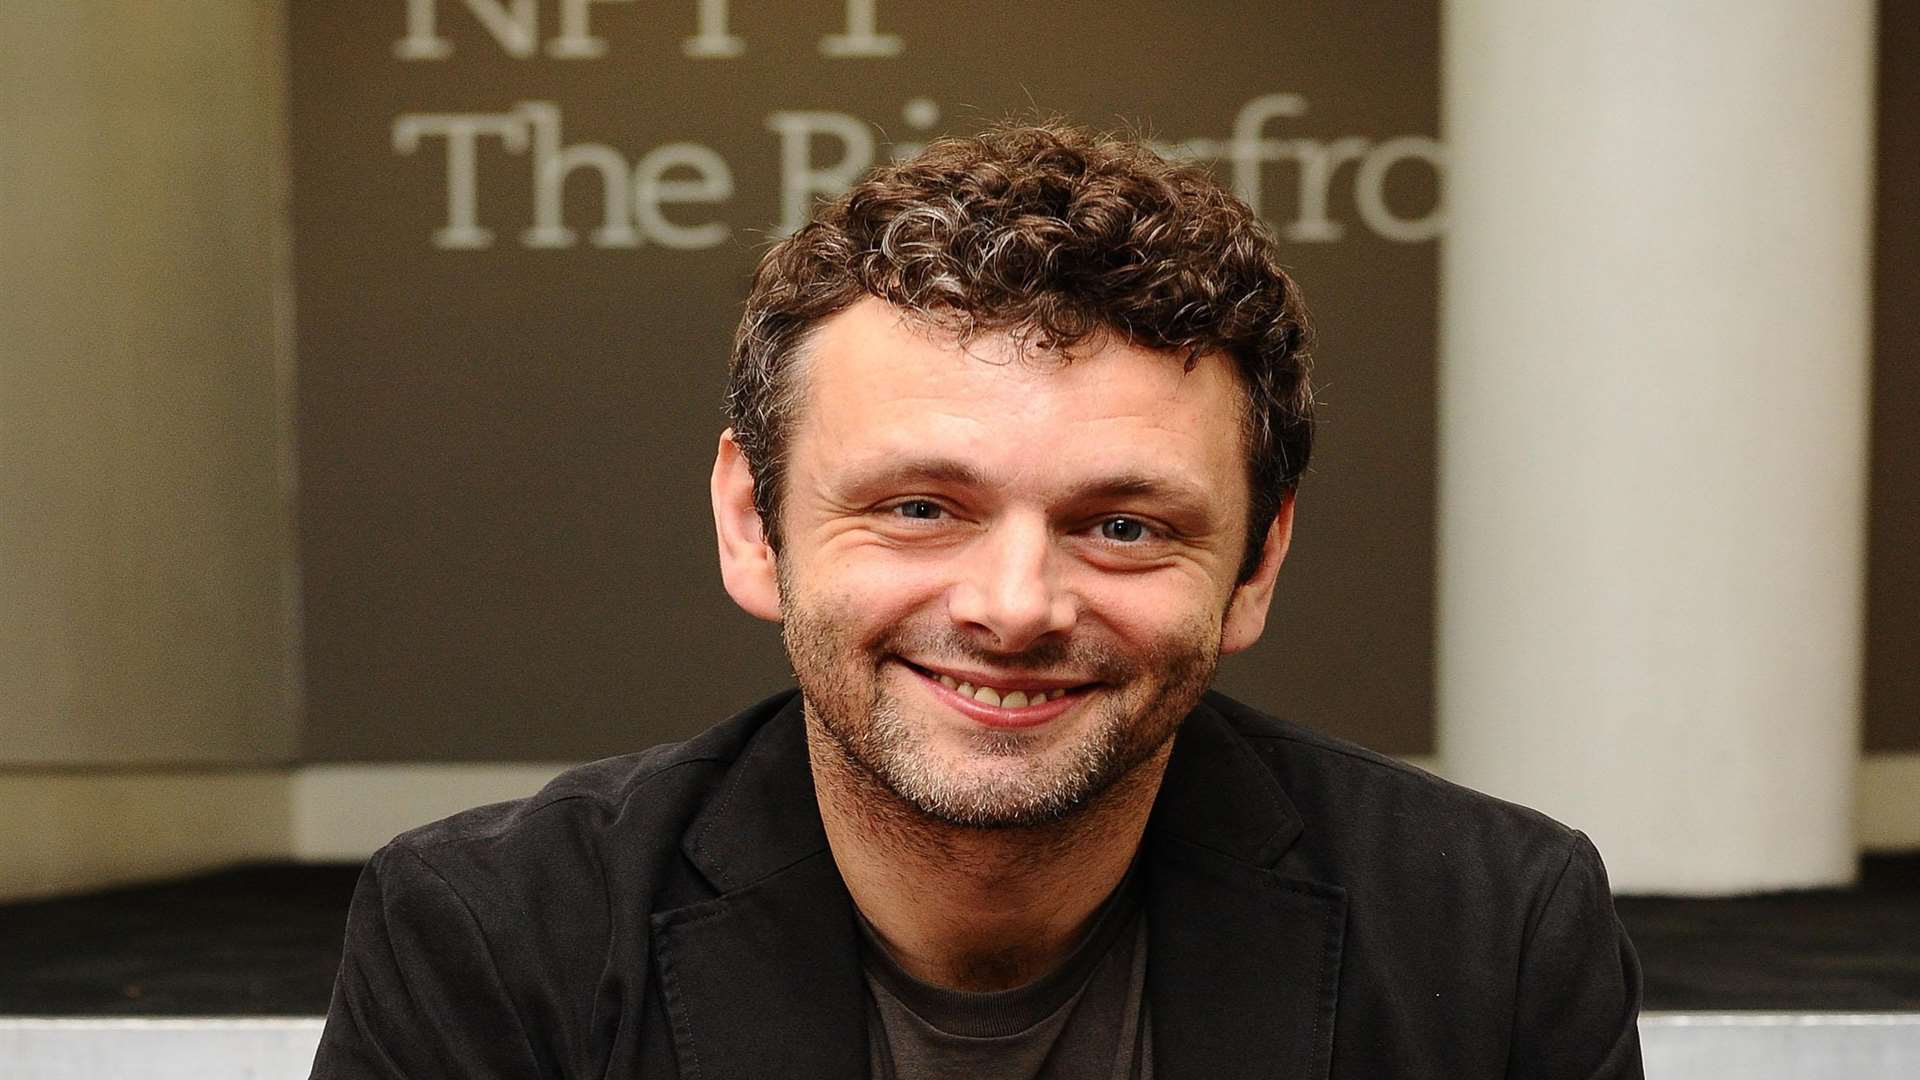 Hollywood actor Michael Sheen